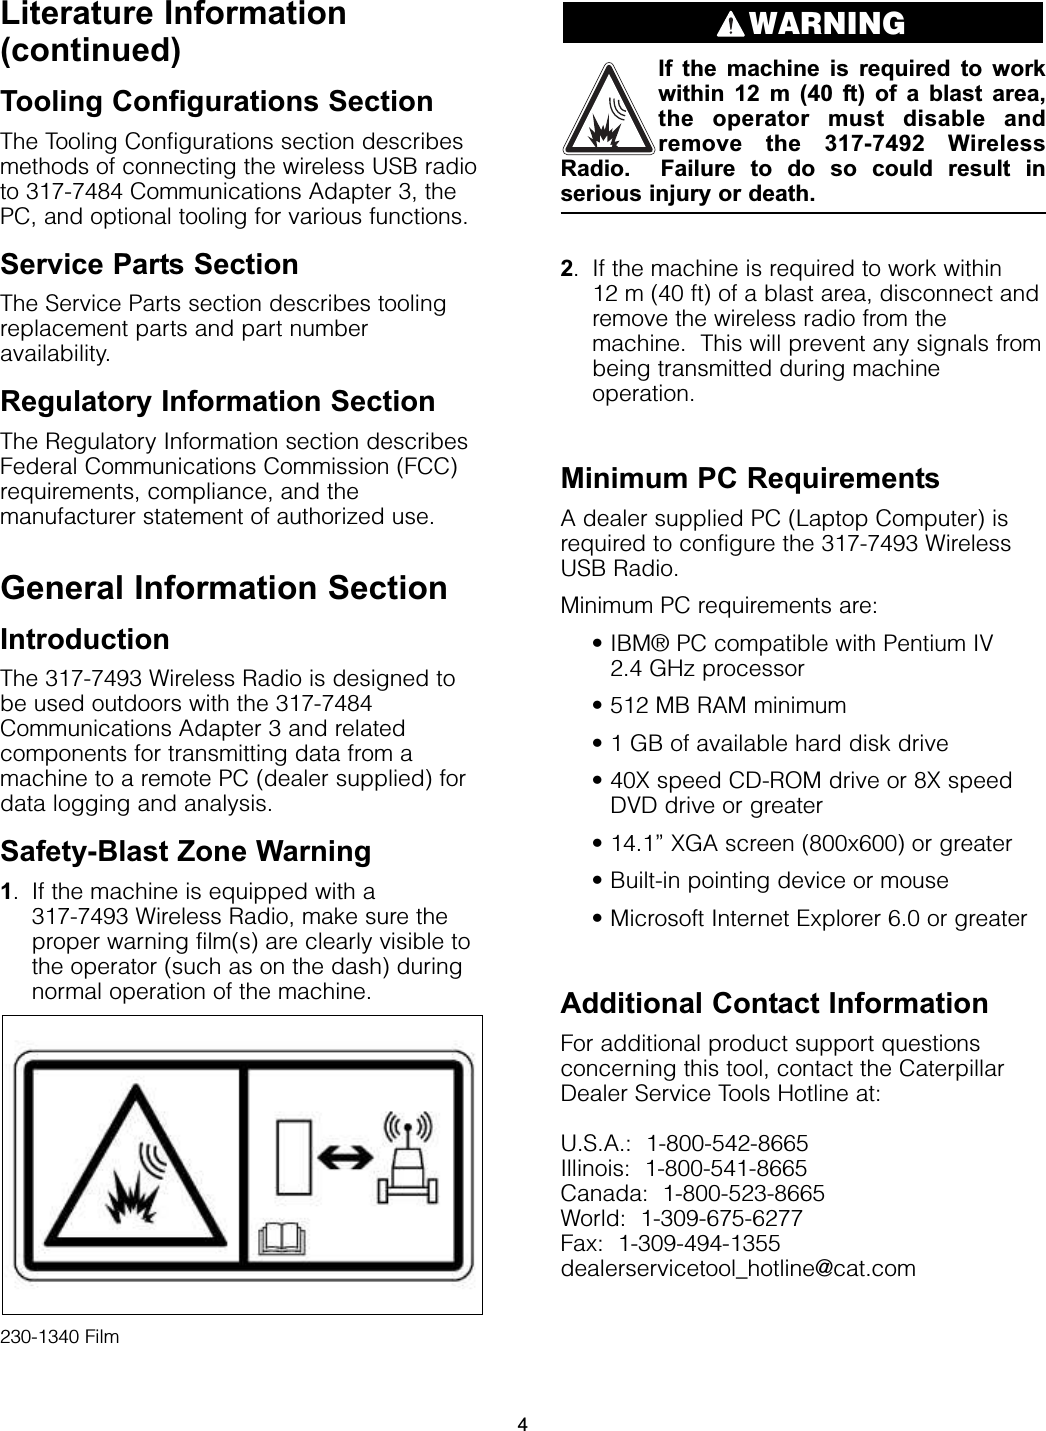 Literature Information(continued)Tooling Configurations SectionThe Tooling Configurations section describesmethods of connecting the wireless USB radioto 317-7484 Communications Adapter 3, thePC, and optional tooling for various functions.Service Parts SectionThe Service Parts section describes toolingreplacement parts and part numberavailability.Regulatory Information SectionThe Regulatory Information section describesFederal Communications Commission (FCC)requirements, compliance, and themanufacturer statement of authorized use.General Information SectionIntroductionThe 317-7493 Wireless Radio is designed tobe used outdoors with the 317-7484Communications Adapter 3 and relatedcomponents for transmitting data from amachine to a remote PC (dealer supplied) fordata logging and analysis.Safety-Blast Zone Warning1. If the machine is equipped with a 317-7493 Wireless Radio, make sure theproper warning film(s) are clearly visible tothe operator (such as on the dash) duringnormal operation of the machine.230-1340 FilmIf the machine is required to workwithin 12 m (40 ft) of a blast area,the operator must disable andremove the 317-7492 WirelessRadio.  Failure to do so could result inserious injury or death.2. If the machine is required to work within 12 m (40 ft) of a blast area, disconnect andremove the wireless radio from themachine.  This will prevent any signals frombeing transmitted during machineoperation.Minimum PC RequirementsA dealer supplied PC (Laptop Computer) isrequired to configure the 317-7493 WirelessUSB Radio.Minimum PC requirements are:• IBM® PC compatible with Pentium IV 2.4 GHz processor• 512 MB RAM minimum• 1 GB of available hard disk drive• 40X speed CD-ROM drive or 8X speedDVD drive or greater• 14.1” XGA screen (800x600) or greater• Built-in pointing device or mouse• Microsoft Internet Explorer 6.0 or greaterAdditional Contact InformationFor additional product support questionsconcerning this tool, contact the CaterpillarDealer Service Tools Hotline at:U.S.A.:  1-800-542-8665Illinois:  1-800-541-8665Canada:  1-800-523-8665World:  1-309-675-6277Fax:  1-309-494-1355dealerservicetool_hotline@cat.comWARNING4